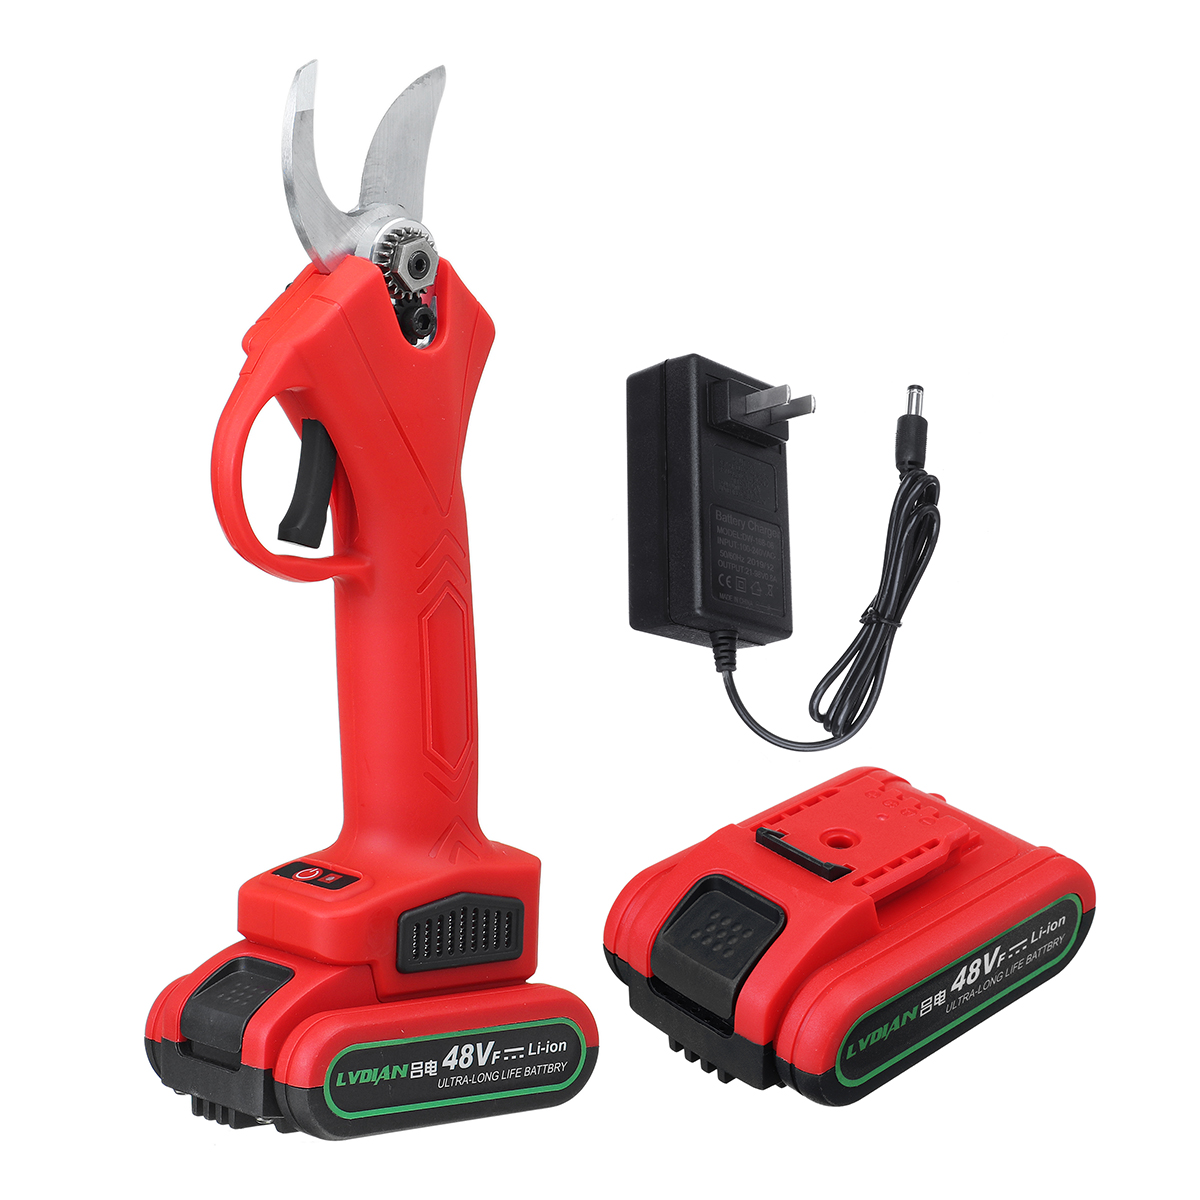 21V-Electric-Pruning-Shears-Rechargeable-Garden-Branches-Scissors-Cutter-Tree-Trimming-Cutting-Tool--1665439-8